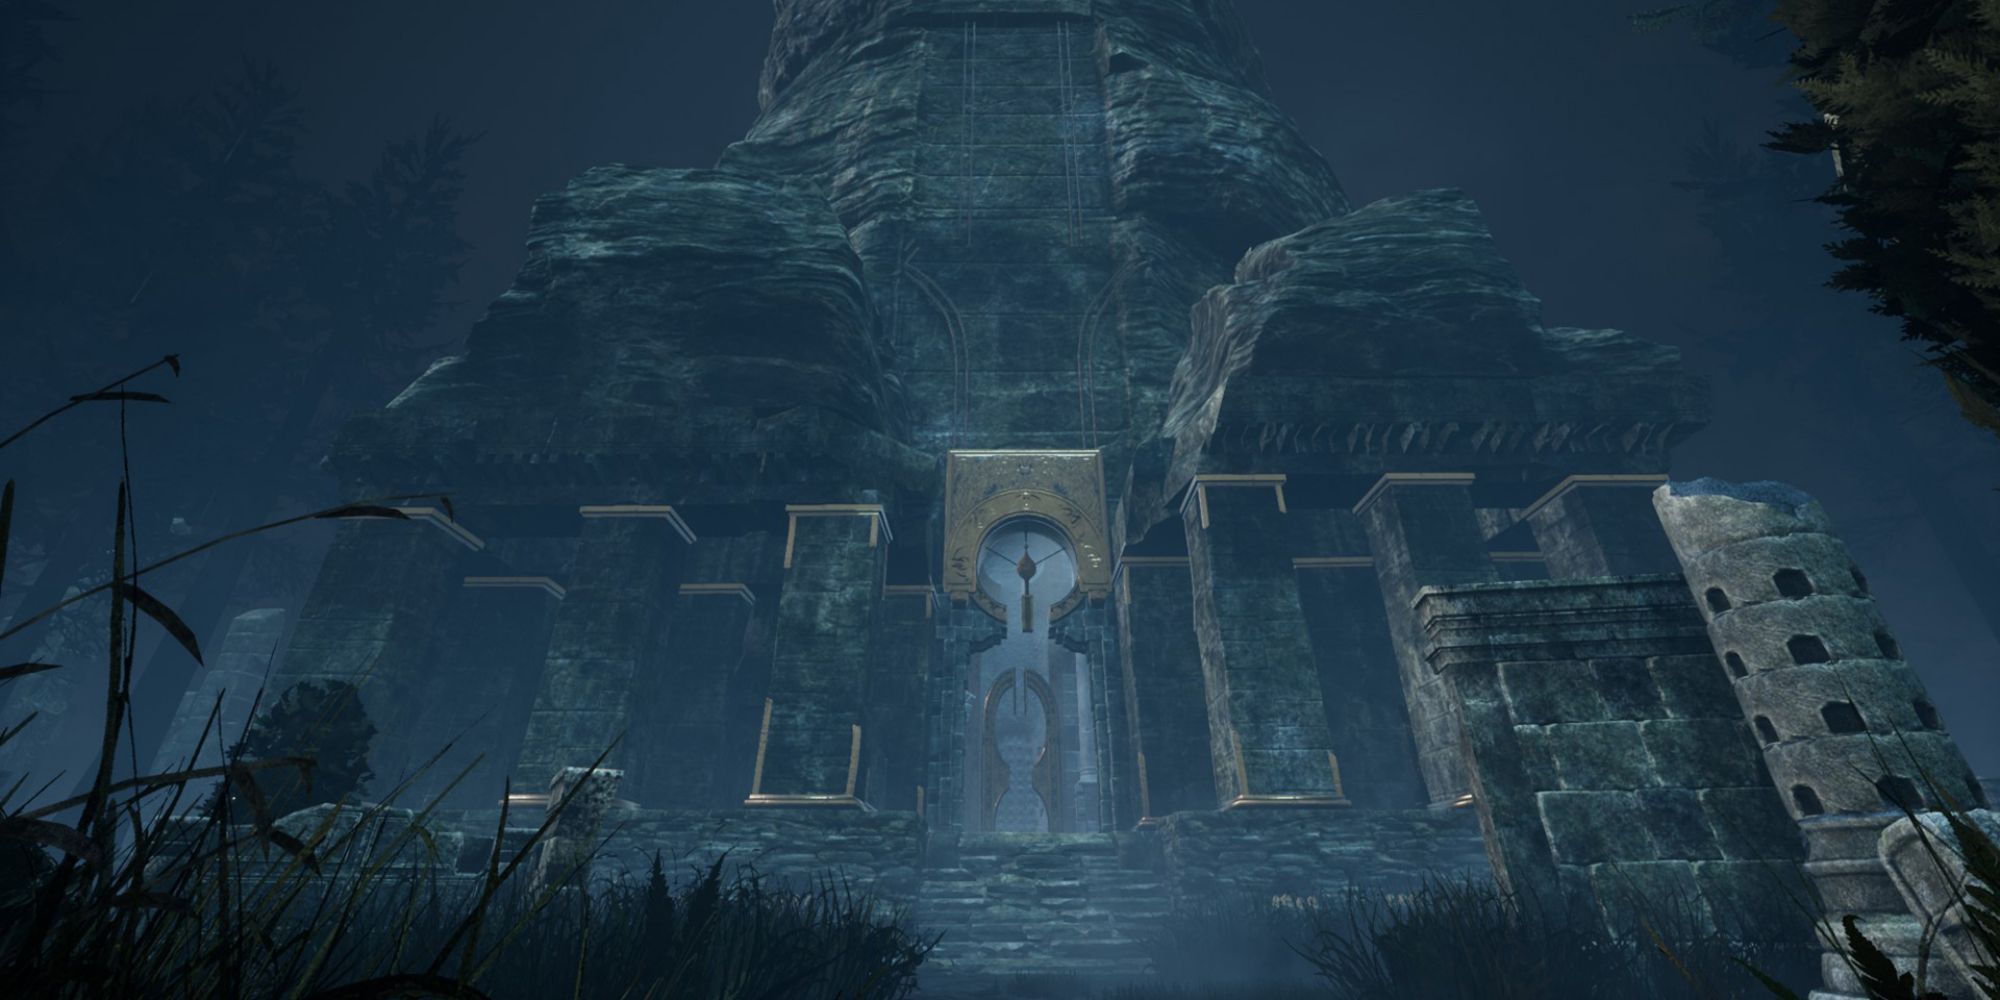 The looming temple structure in Dead by Daylight